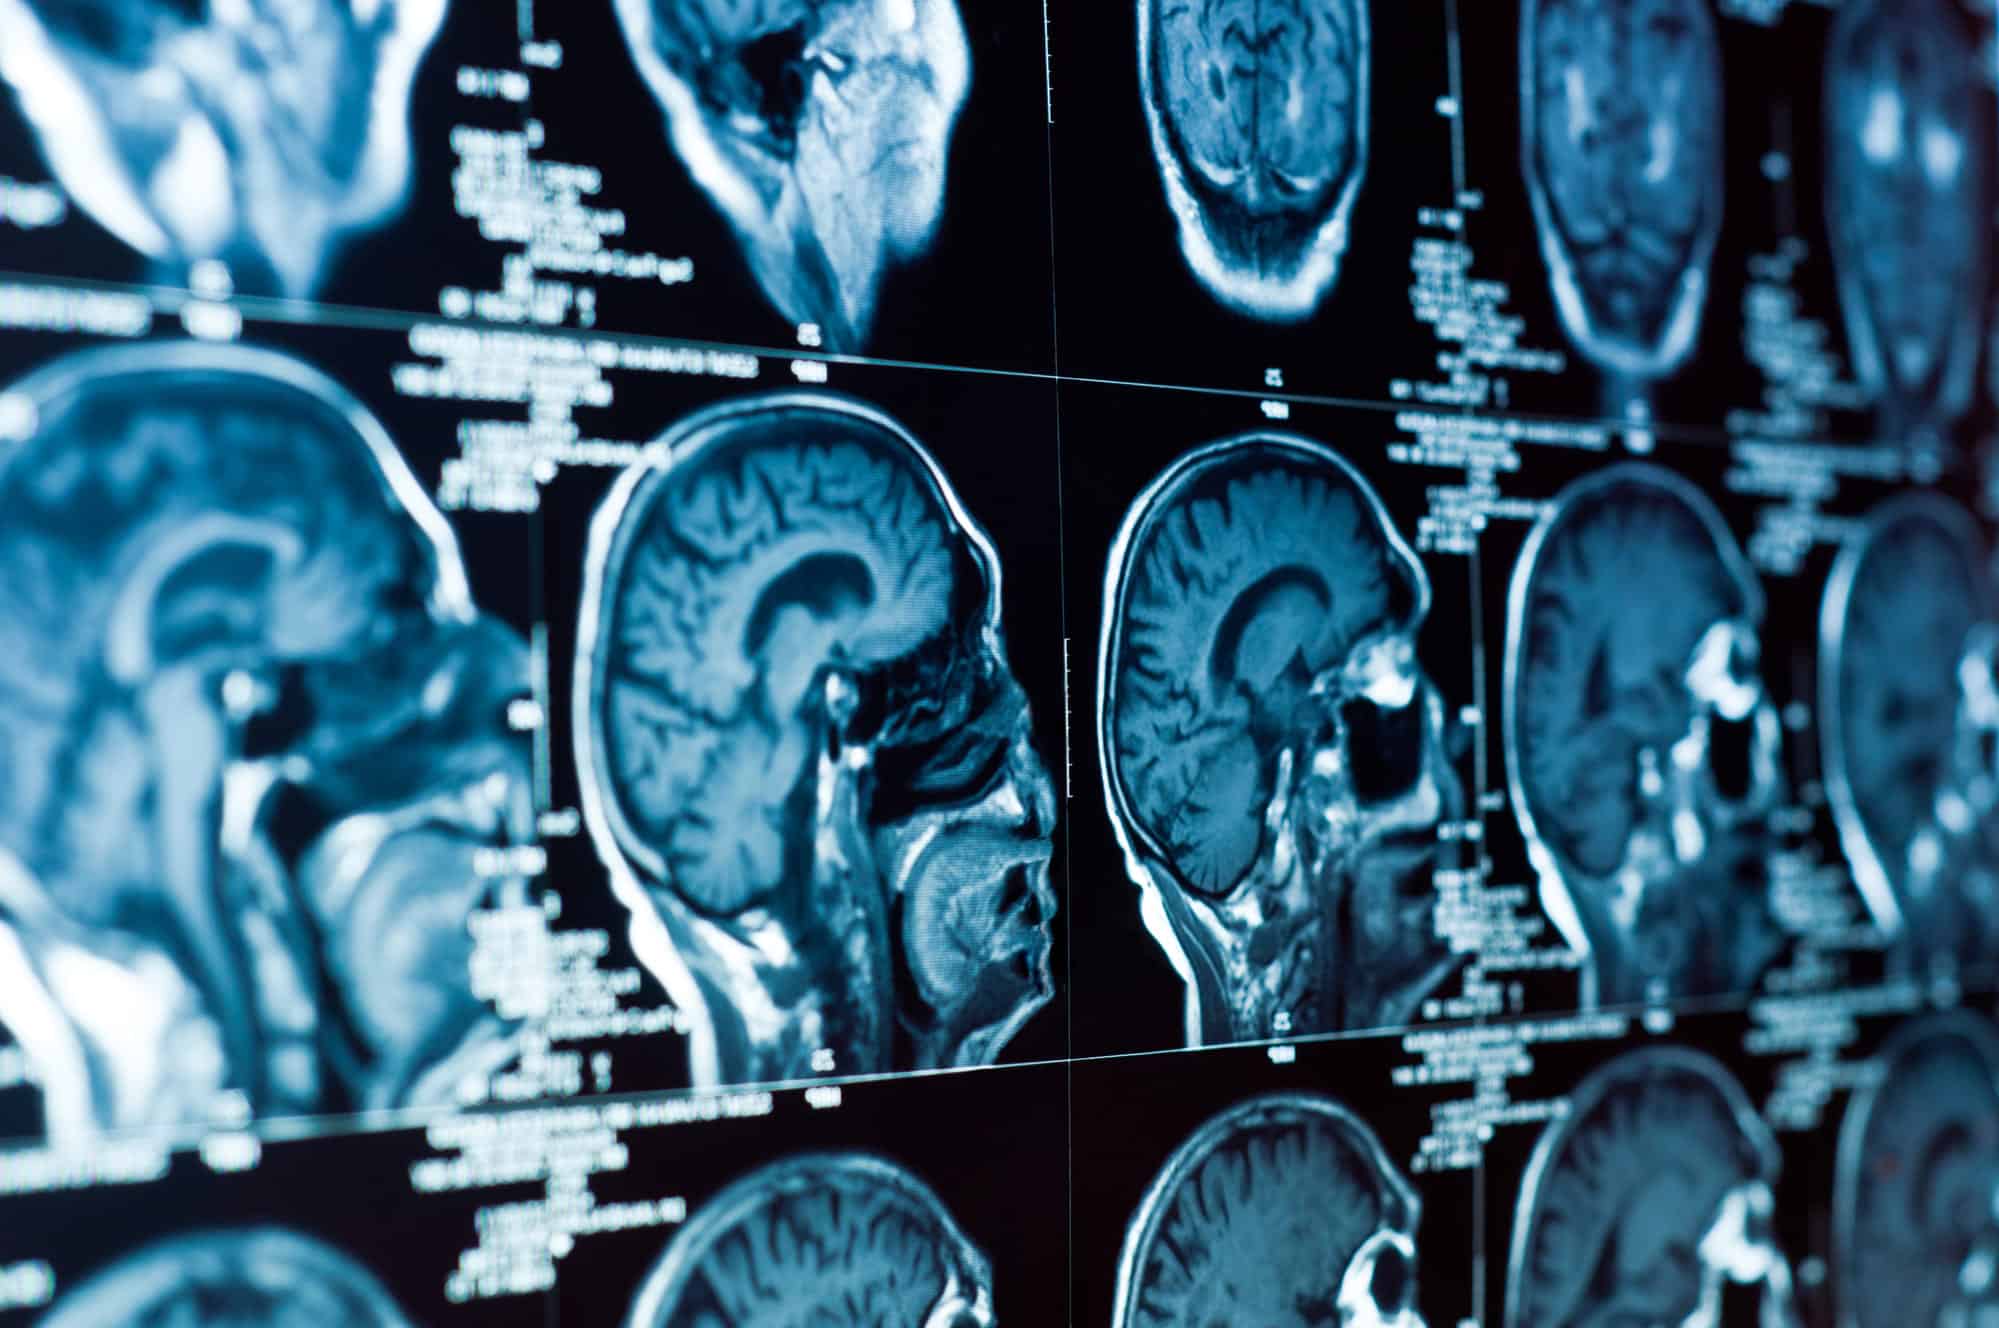 Traumatic Brain Injury due to gravity-related risks such as falling injuries